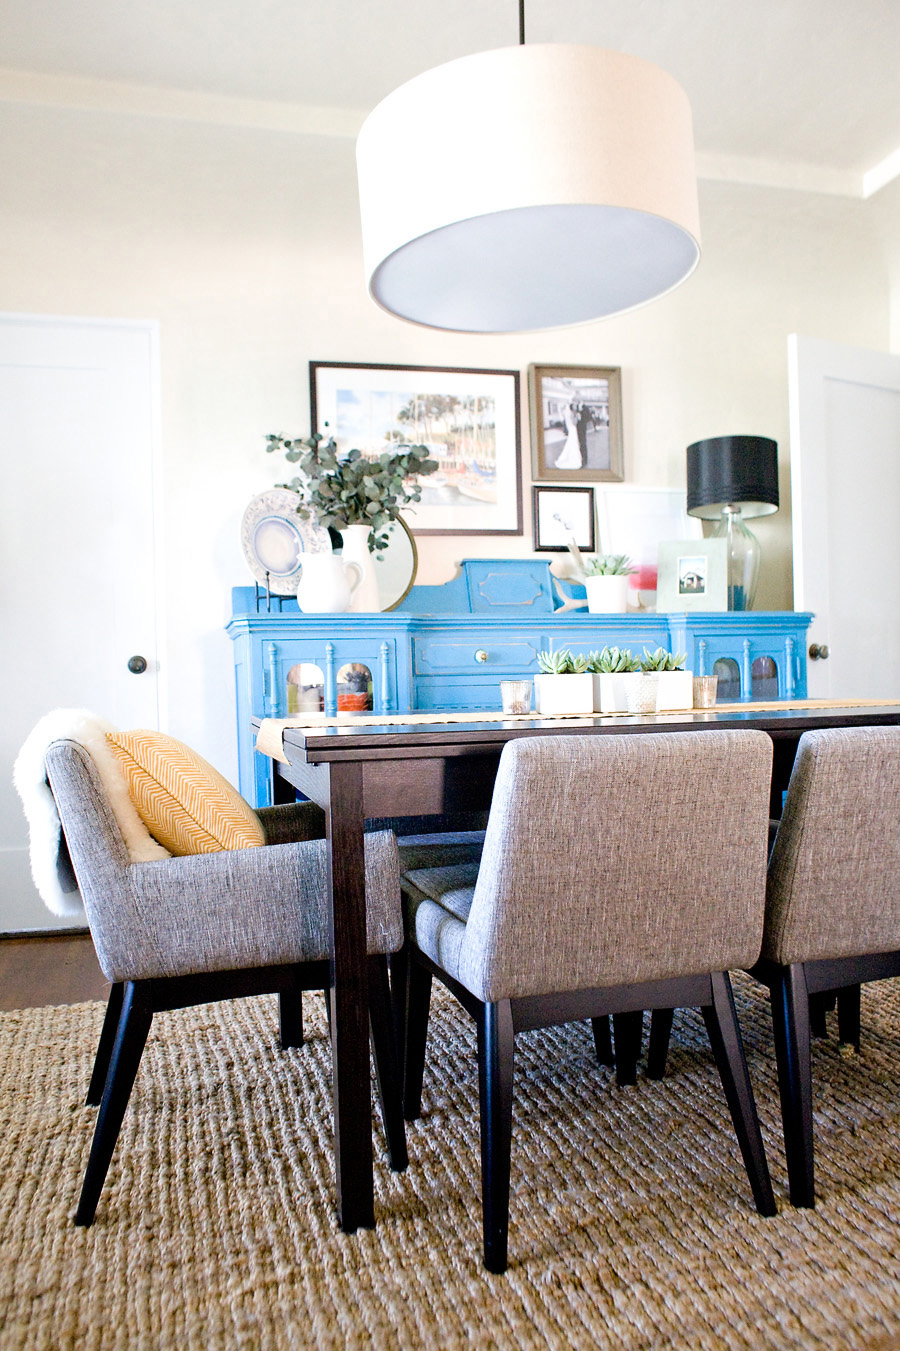 New Dining Room Chairs by Bryght | PepperDesignBlog.com